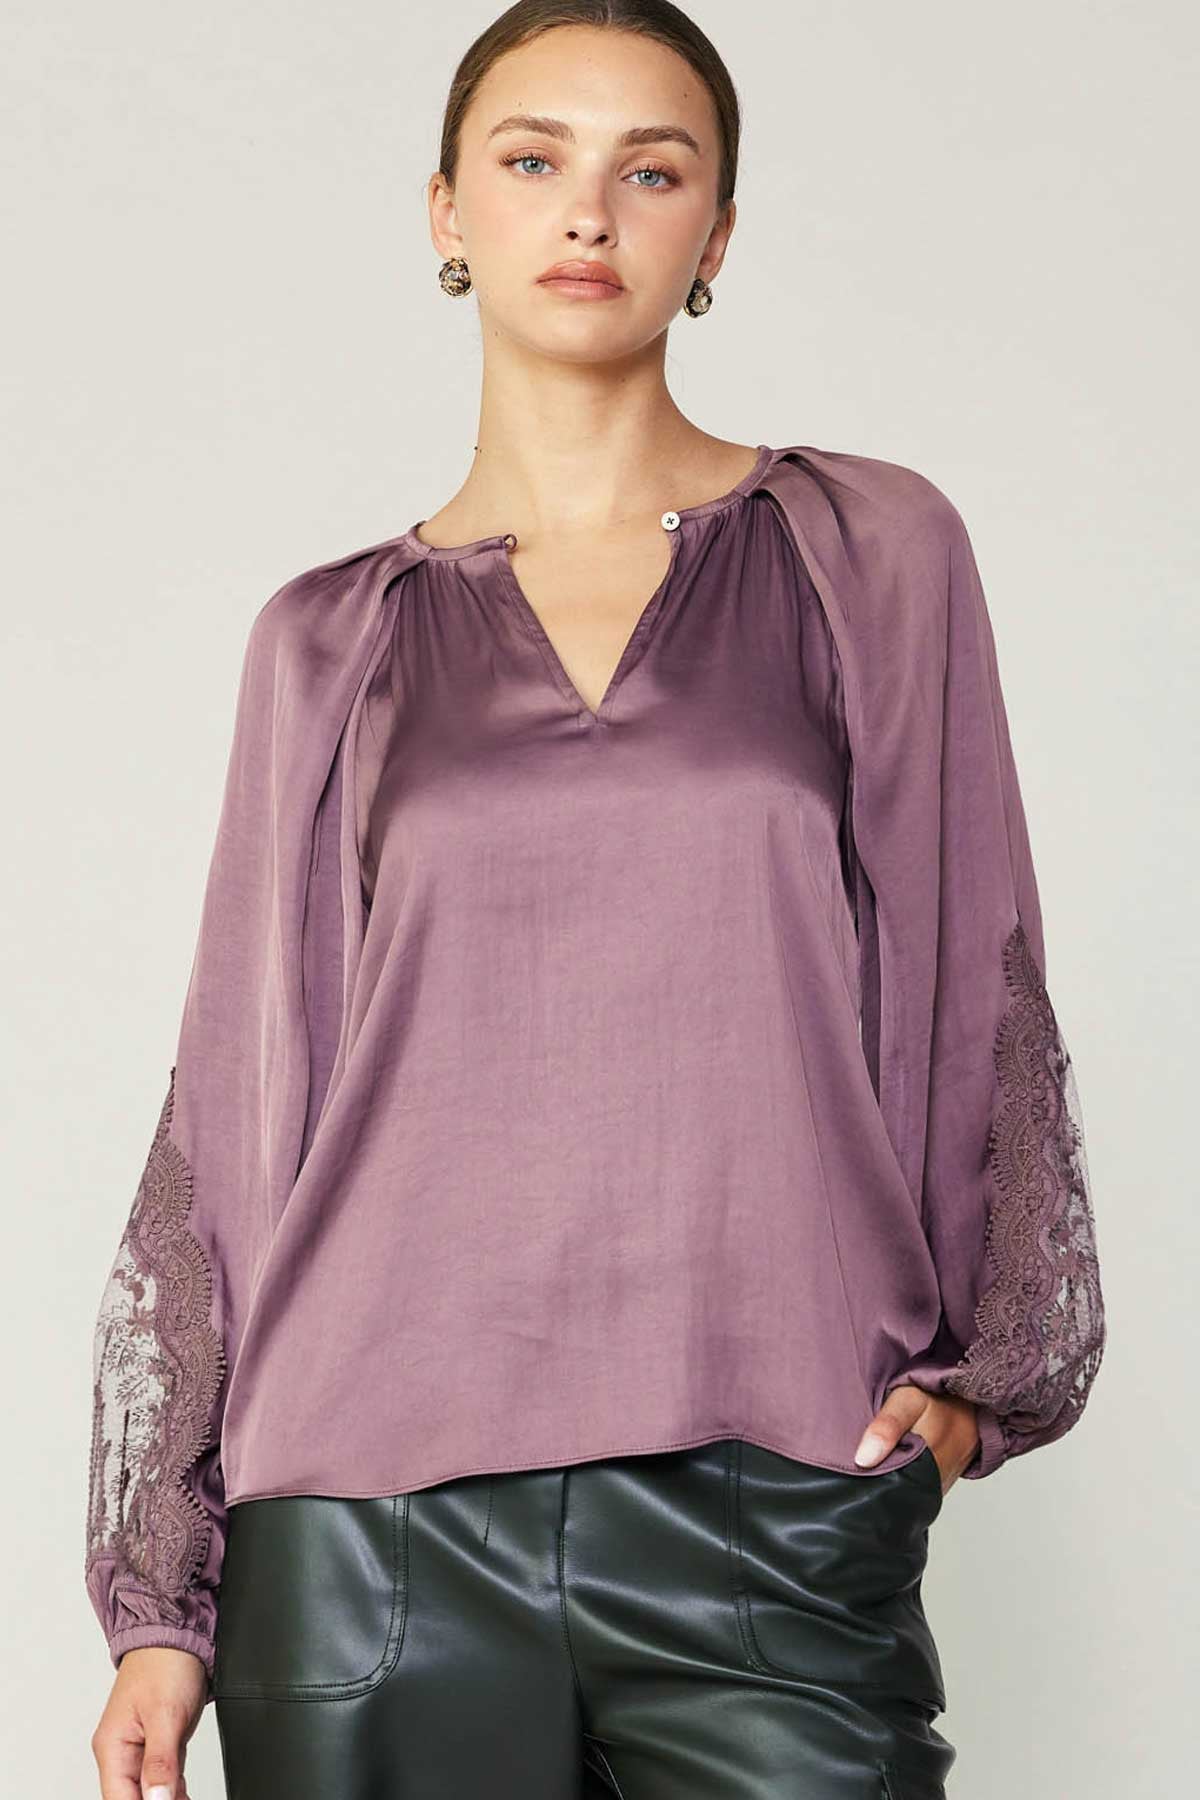 CA Rose Taupe Lace Sleeve Top